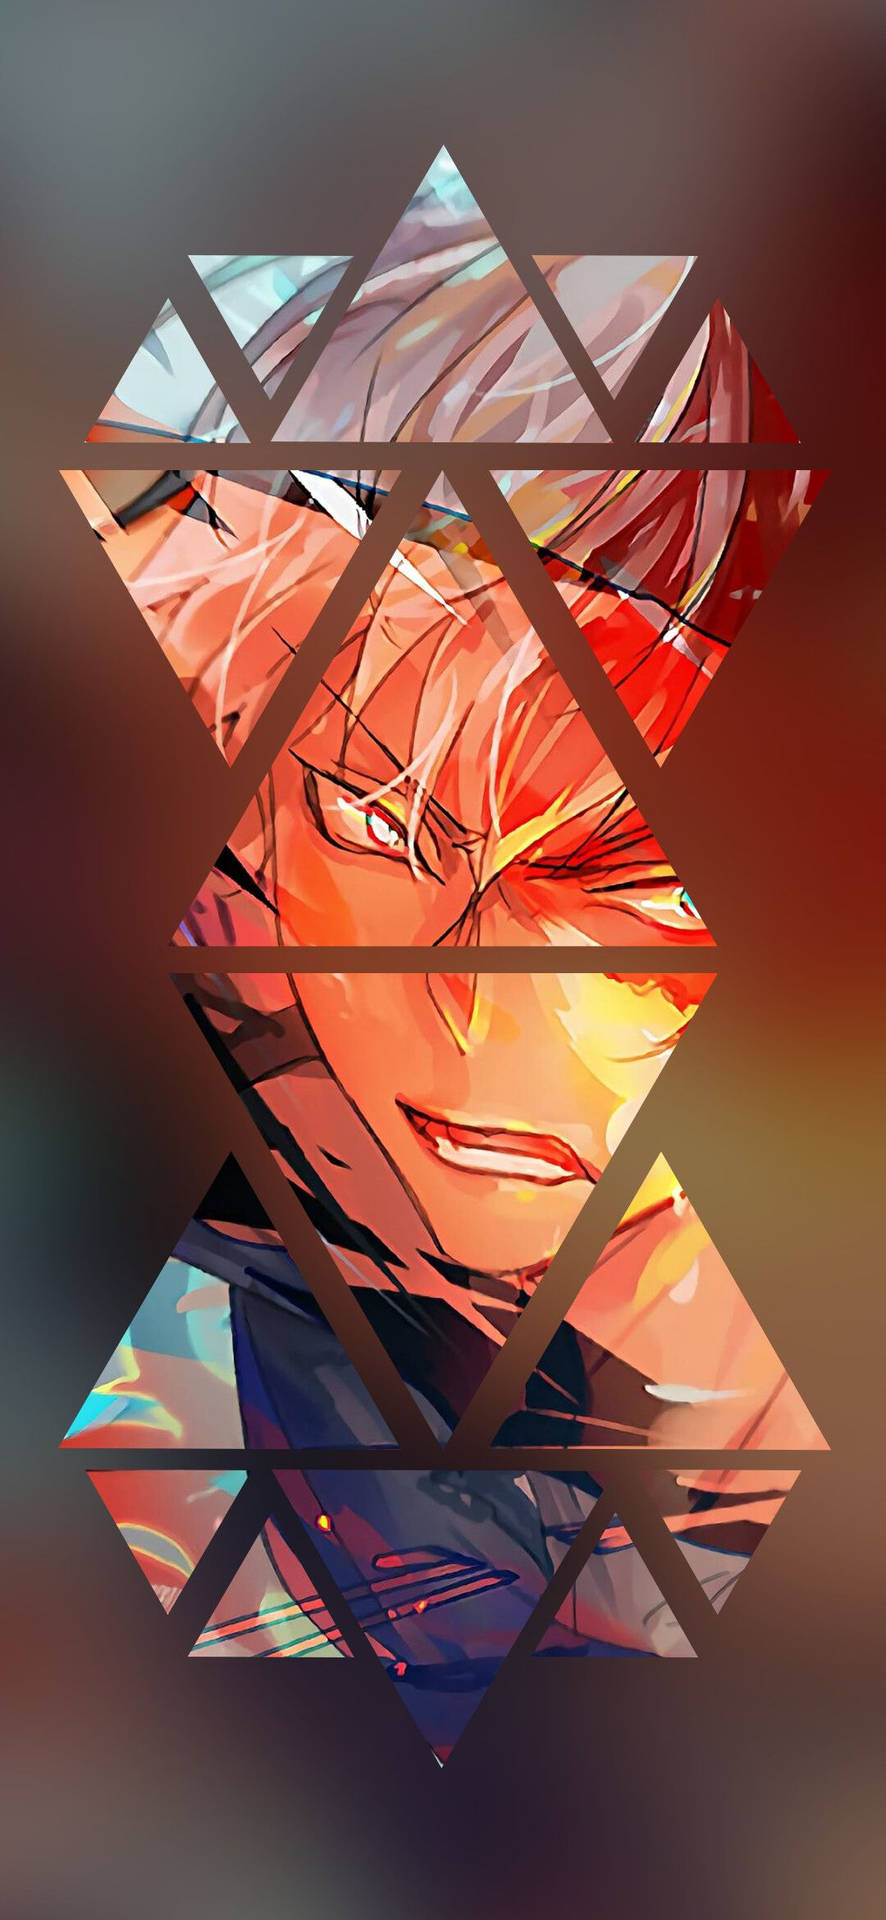 "Burning Brightly: An Artistic Rendition of the Popular Anime Character - Todoroki" Wallpaper